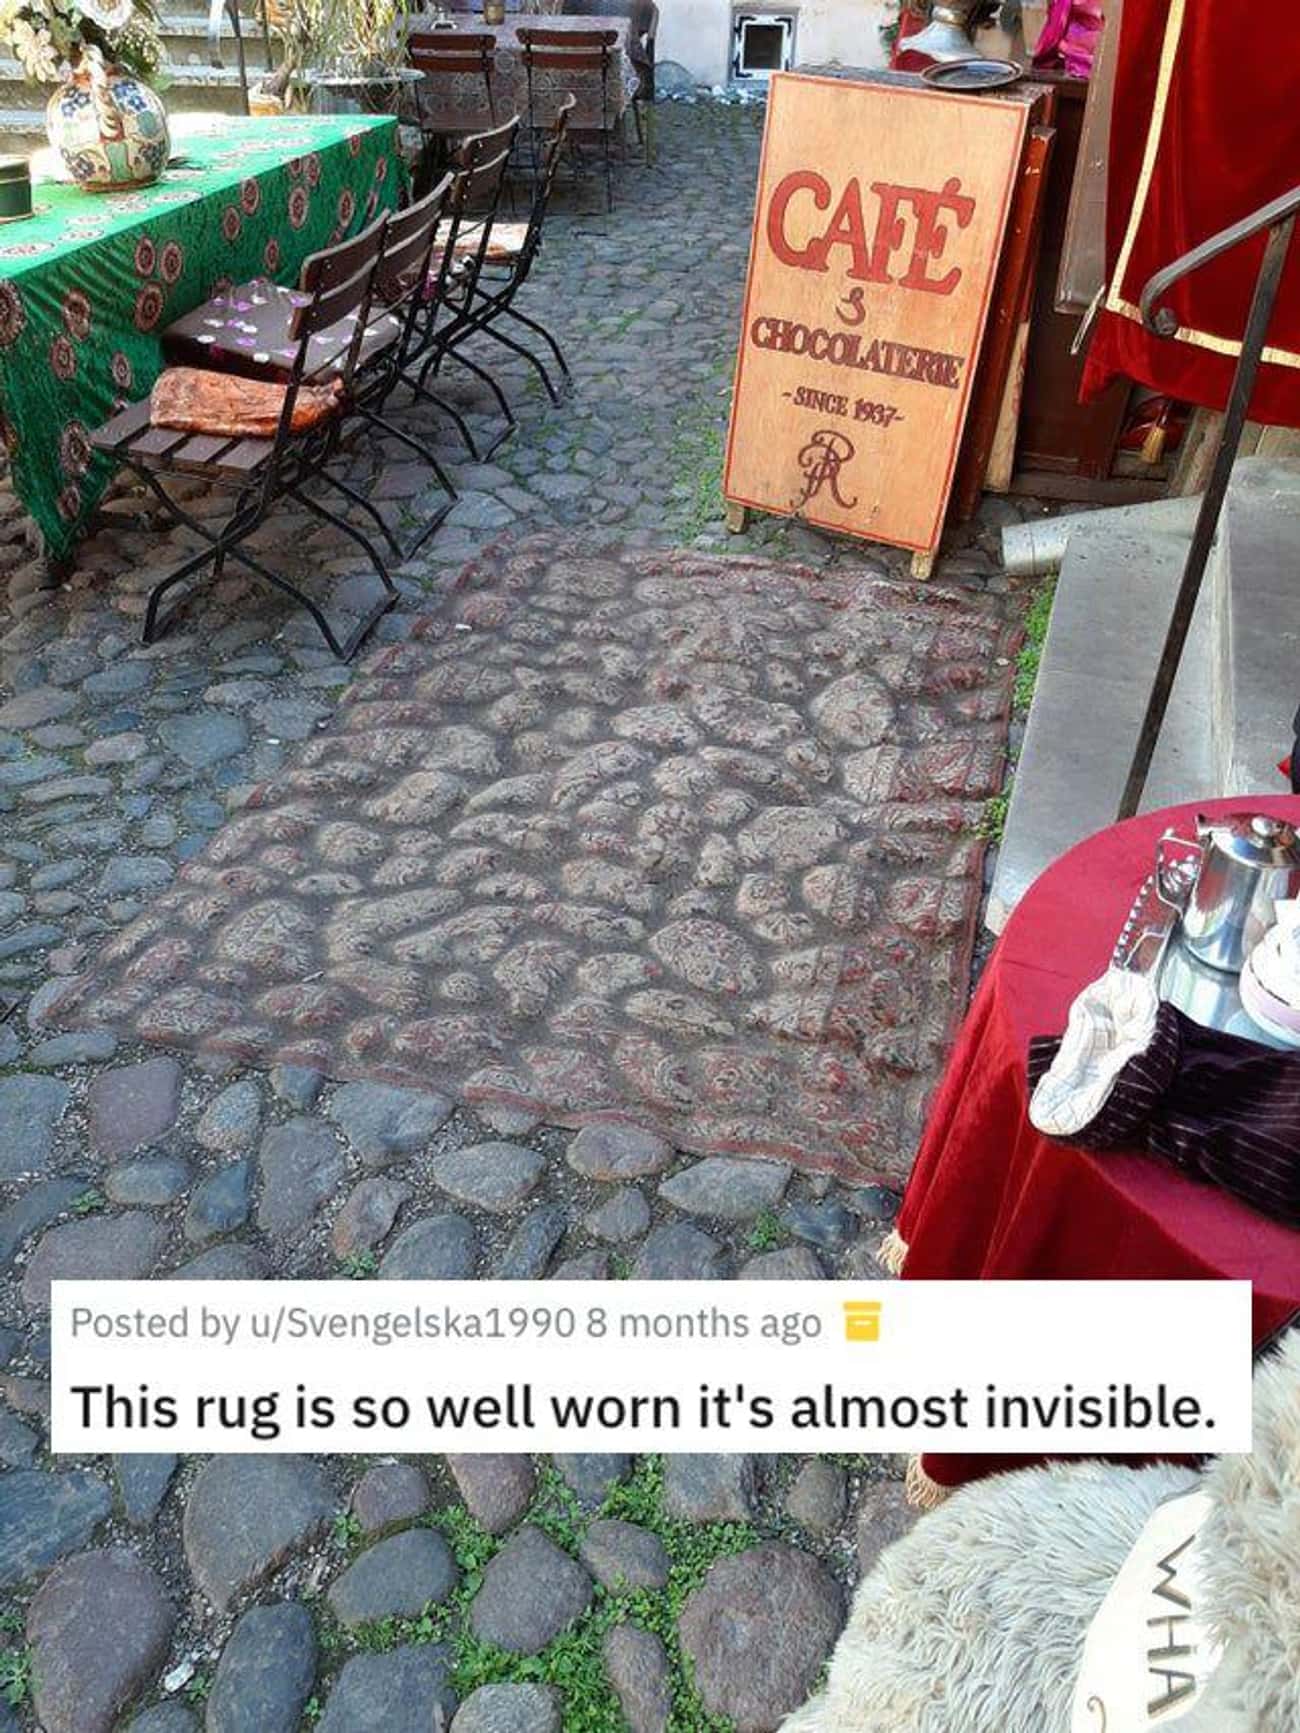 Can't Imagine Removing That Rug